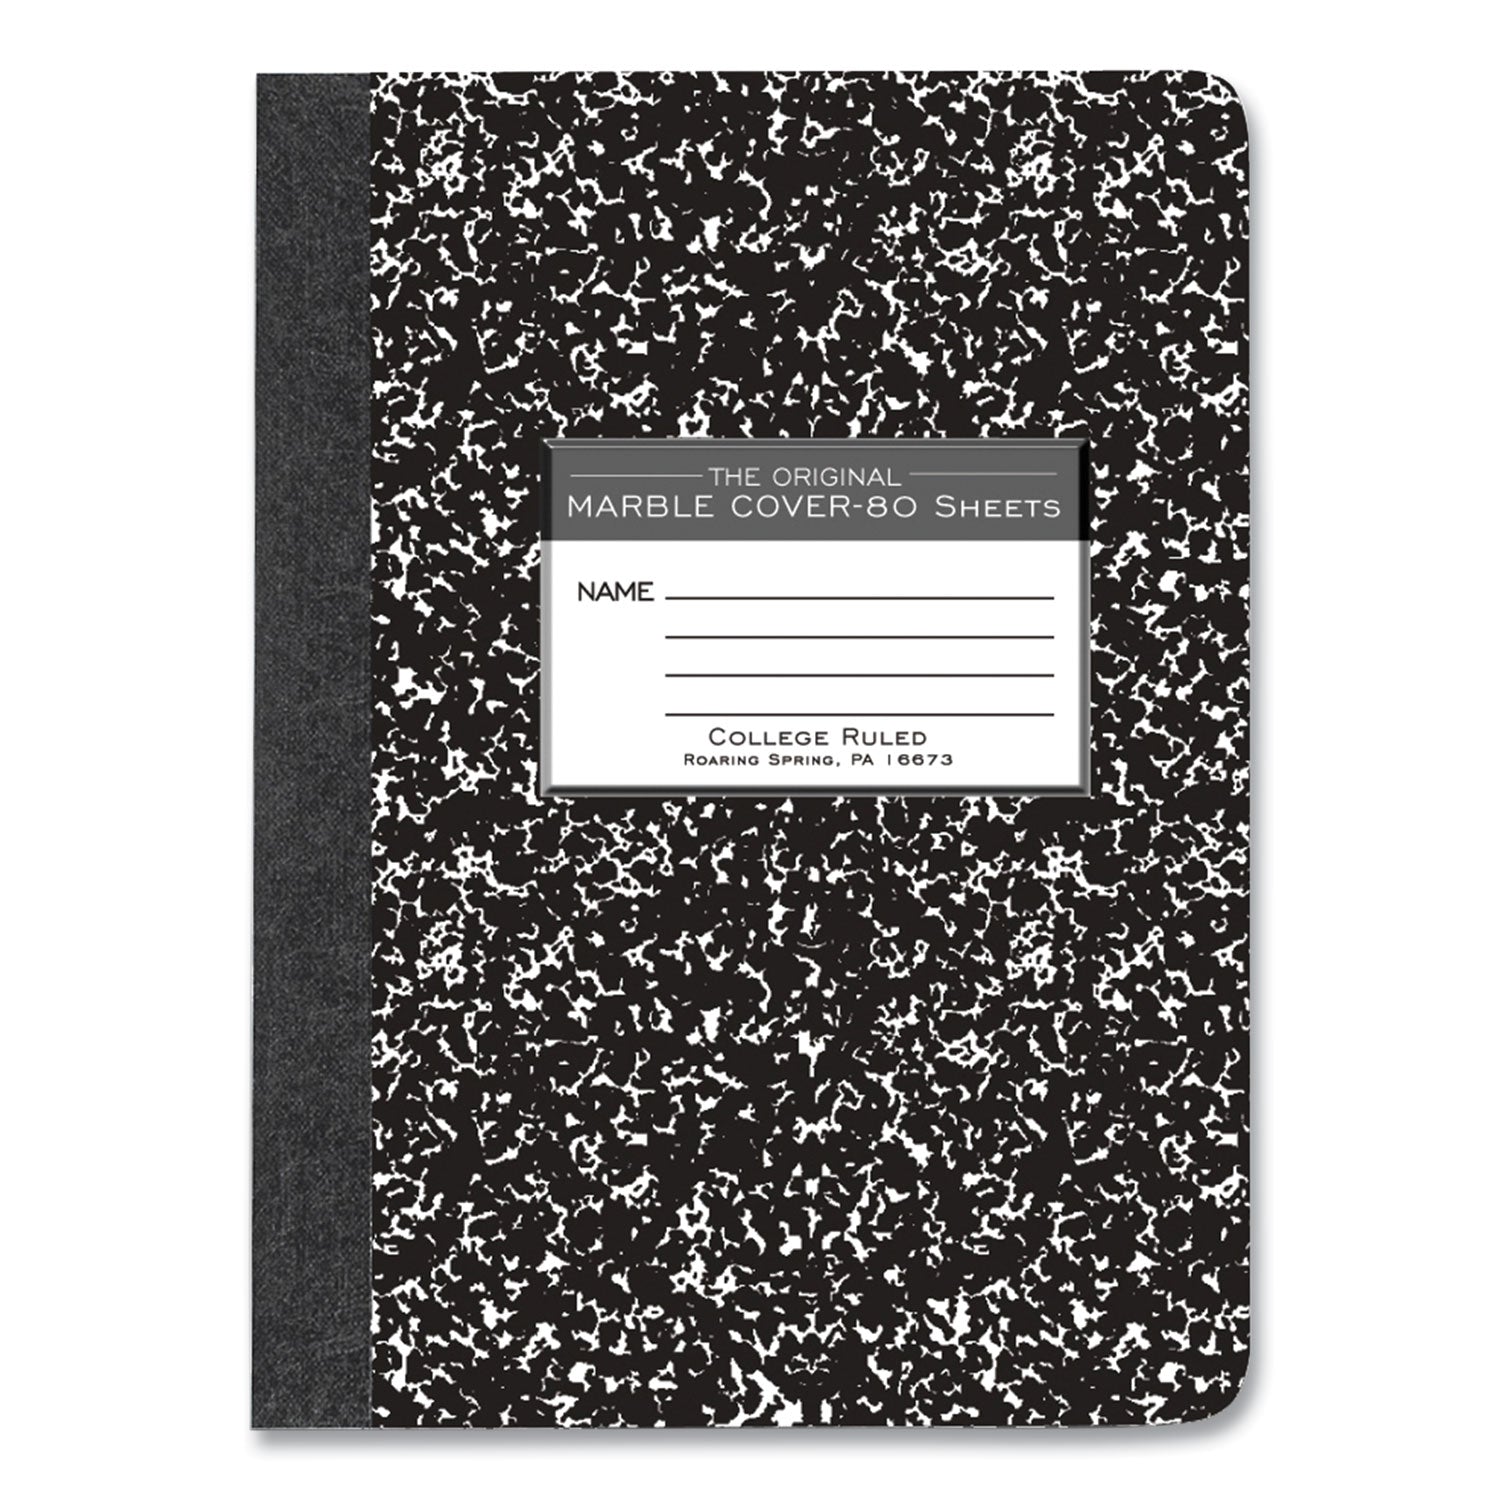 hardcover-marble-composition-book-med-college-rule-black-marble-cover-80-975-x-75-sheet-48-ct-ships-in-4-6-bus-days_roa77226cs - 2